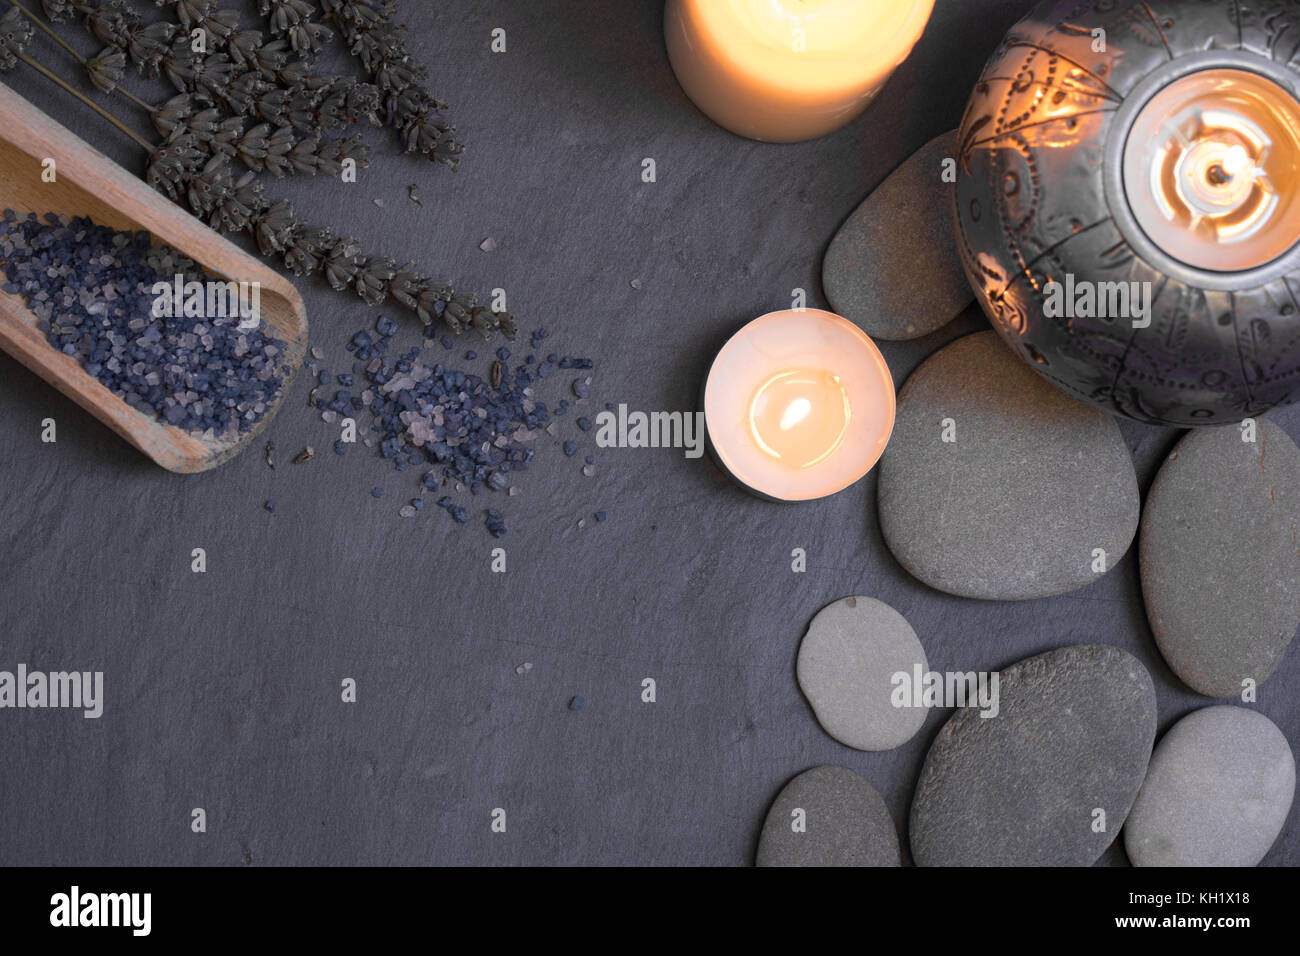 spa and wellness still life composition with candles and pebble stones Stock Photo